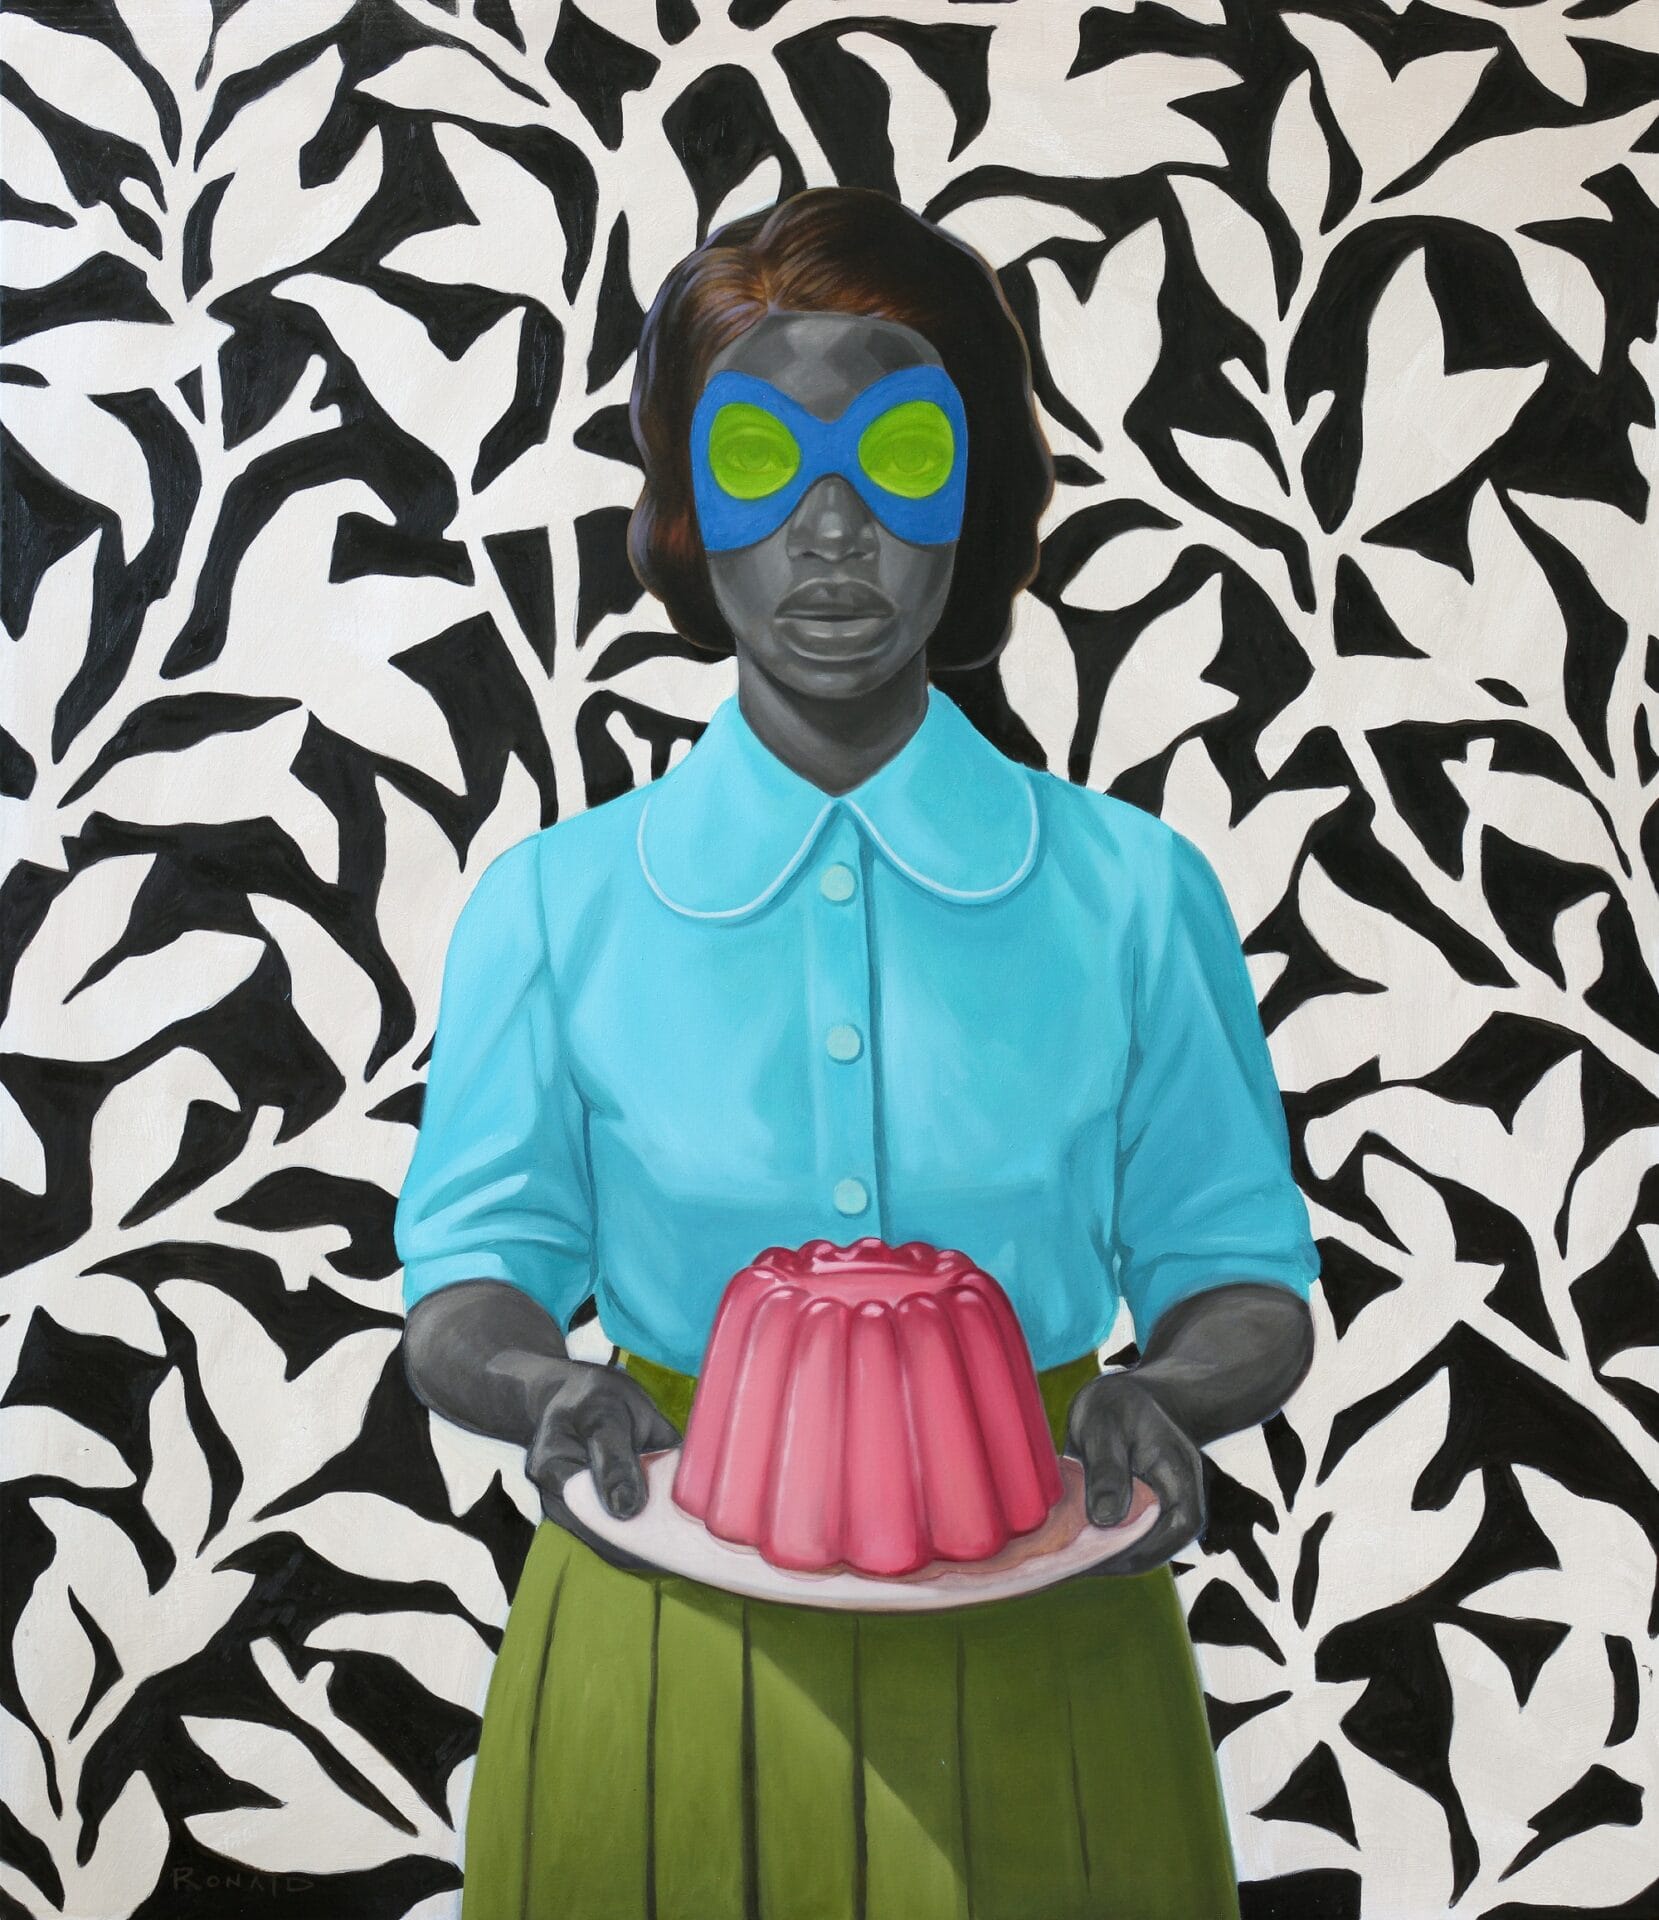 an oil painting of an imagined young black woman wearing a blue blouse and green skirt, standing in front of a black and white background holding a pink jello mold on a platter in front of her and wearing a blue and green eye mask